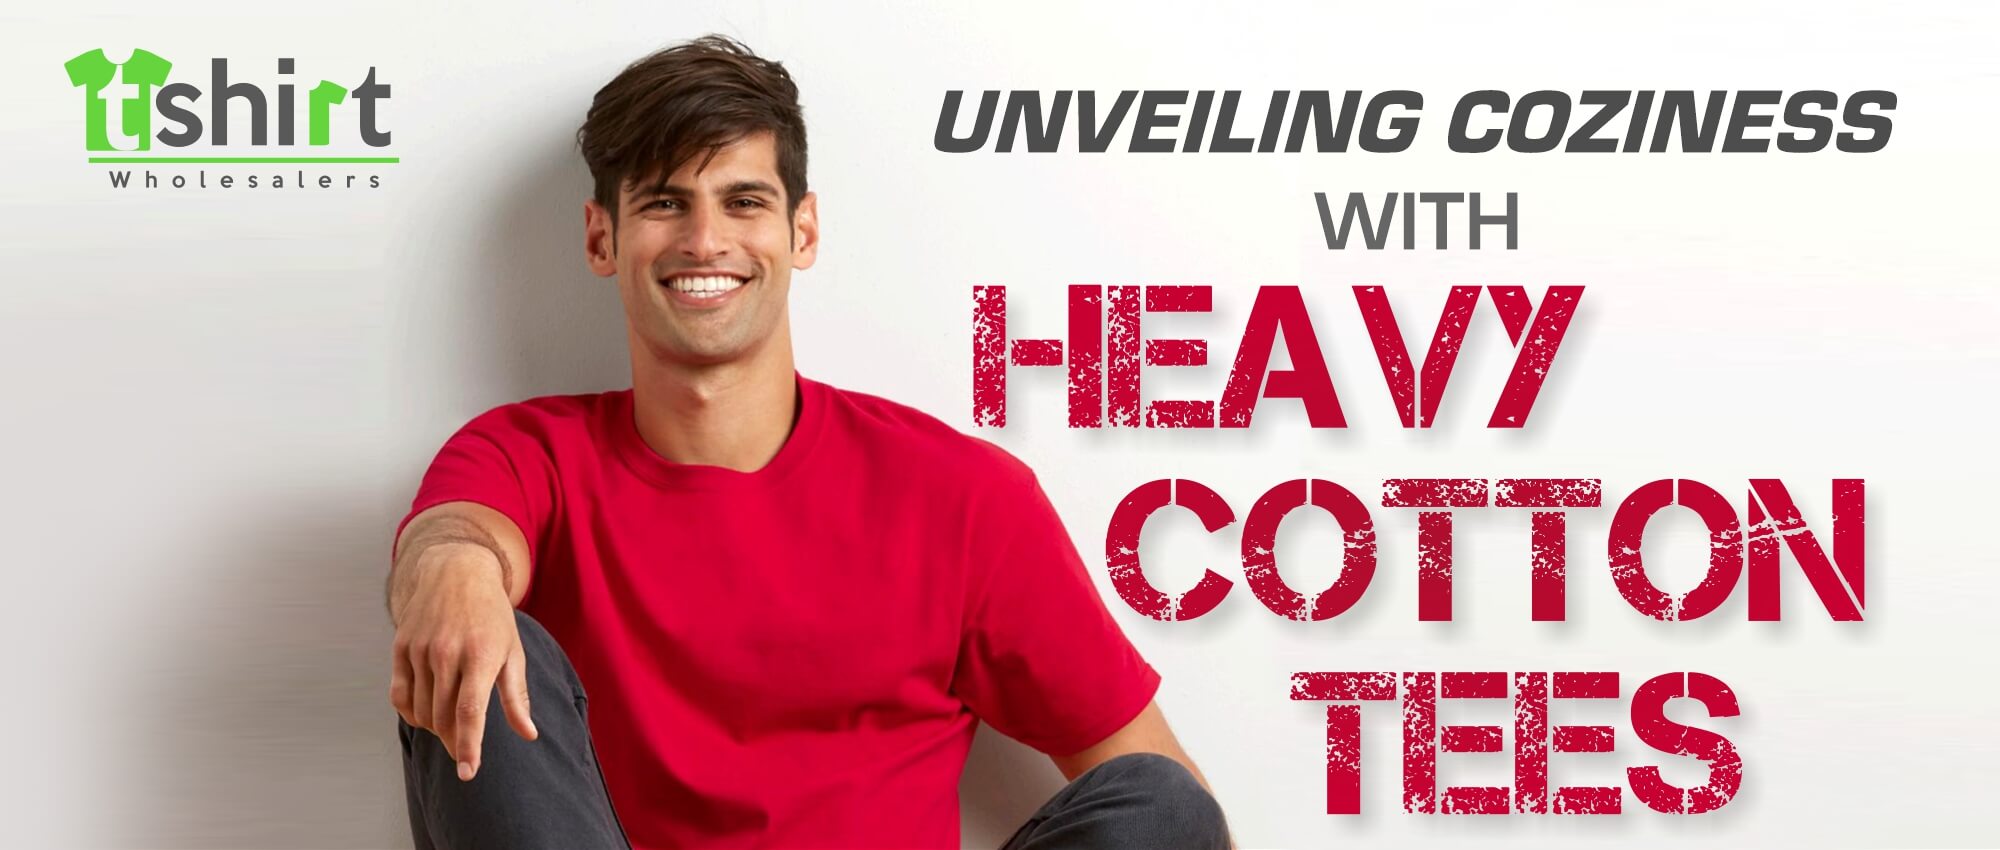 UNVEILING COZINESS WITH HEAVY COTTON TEES